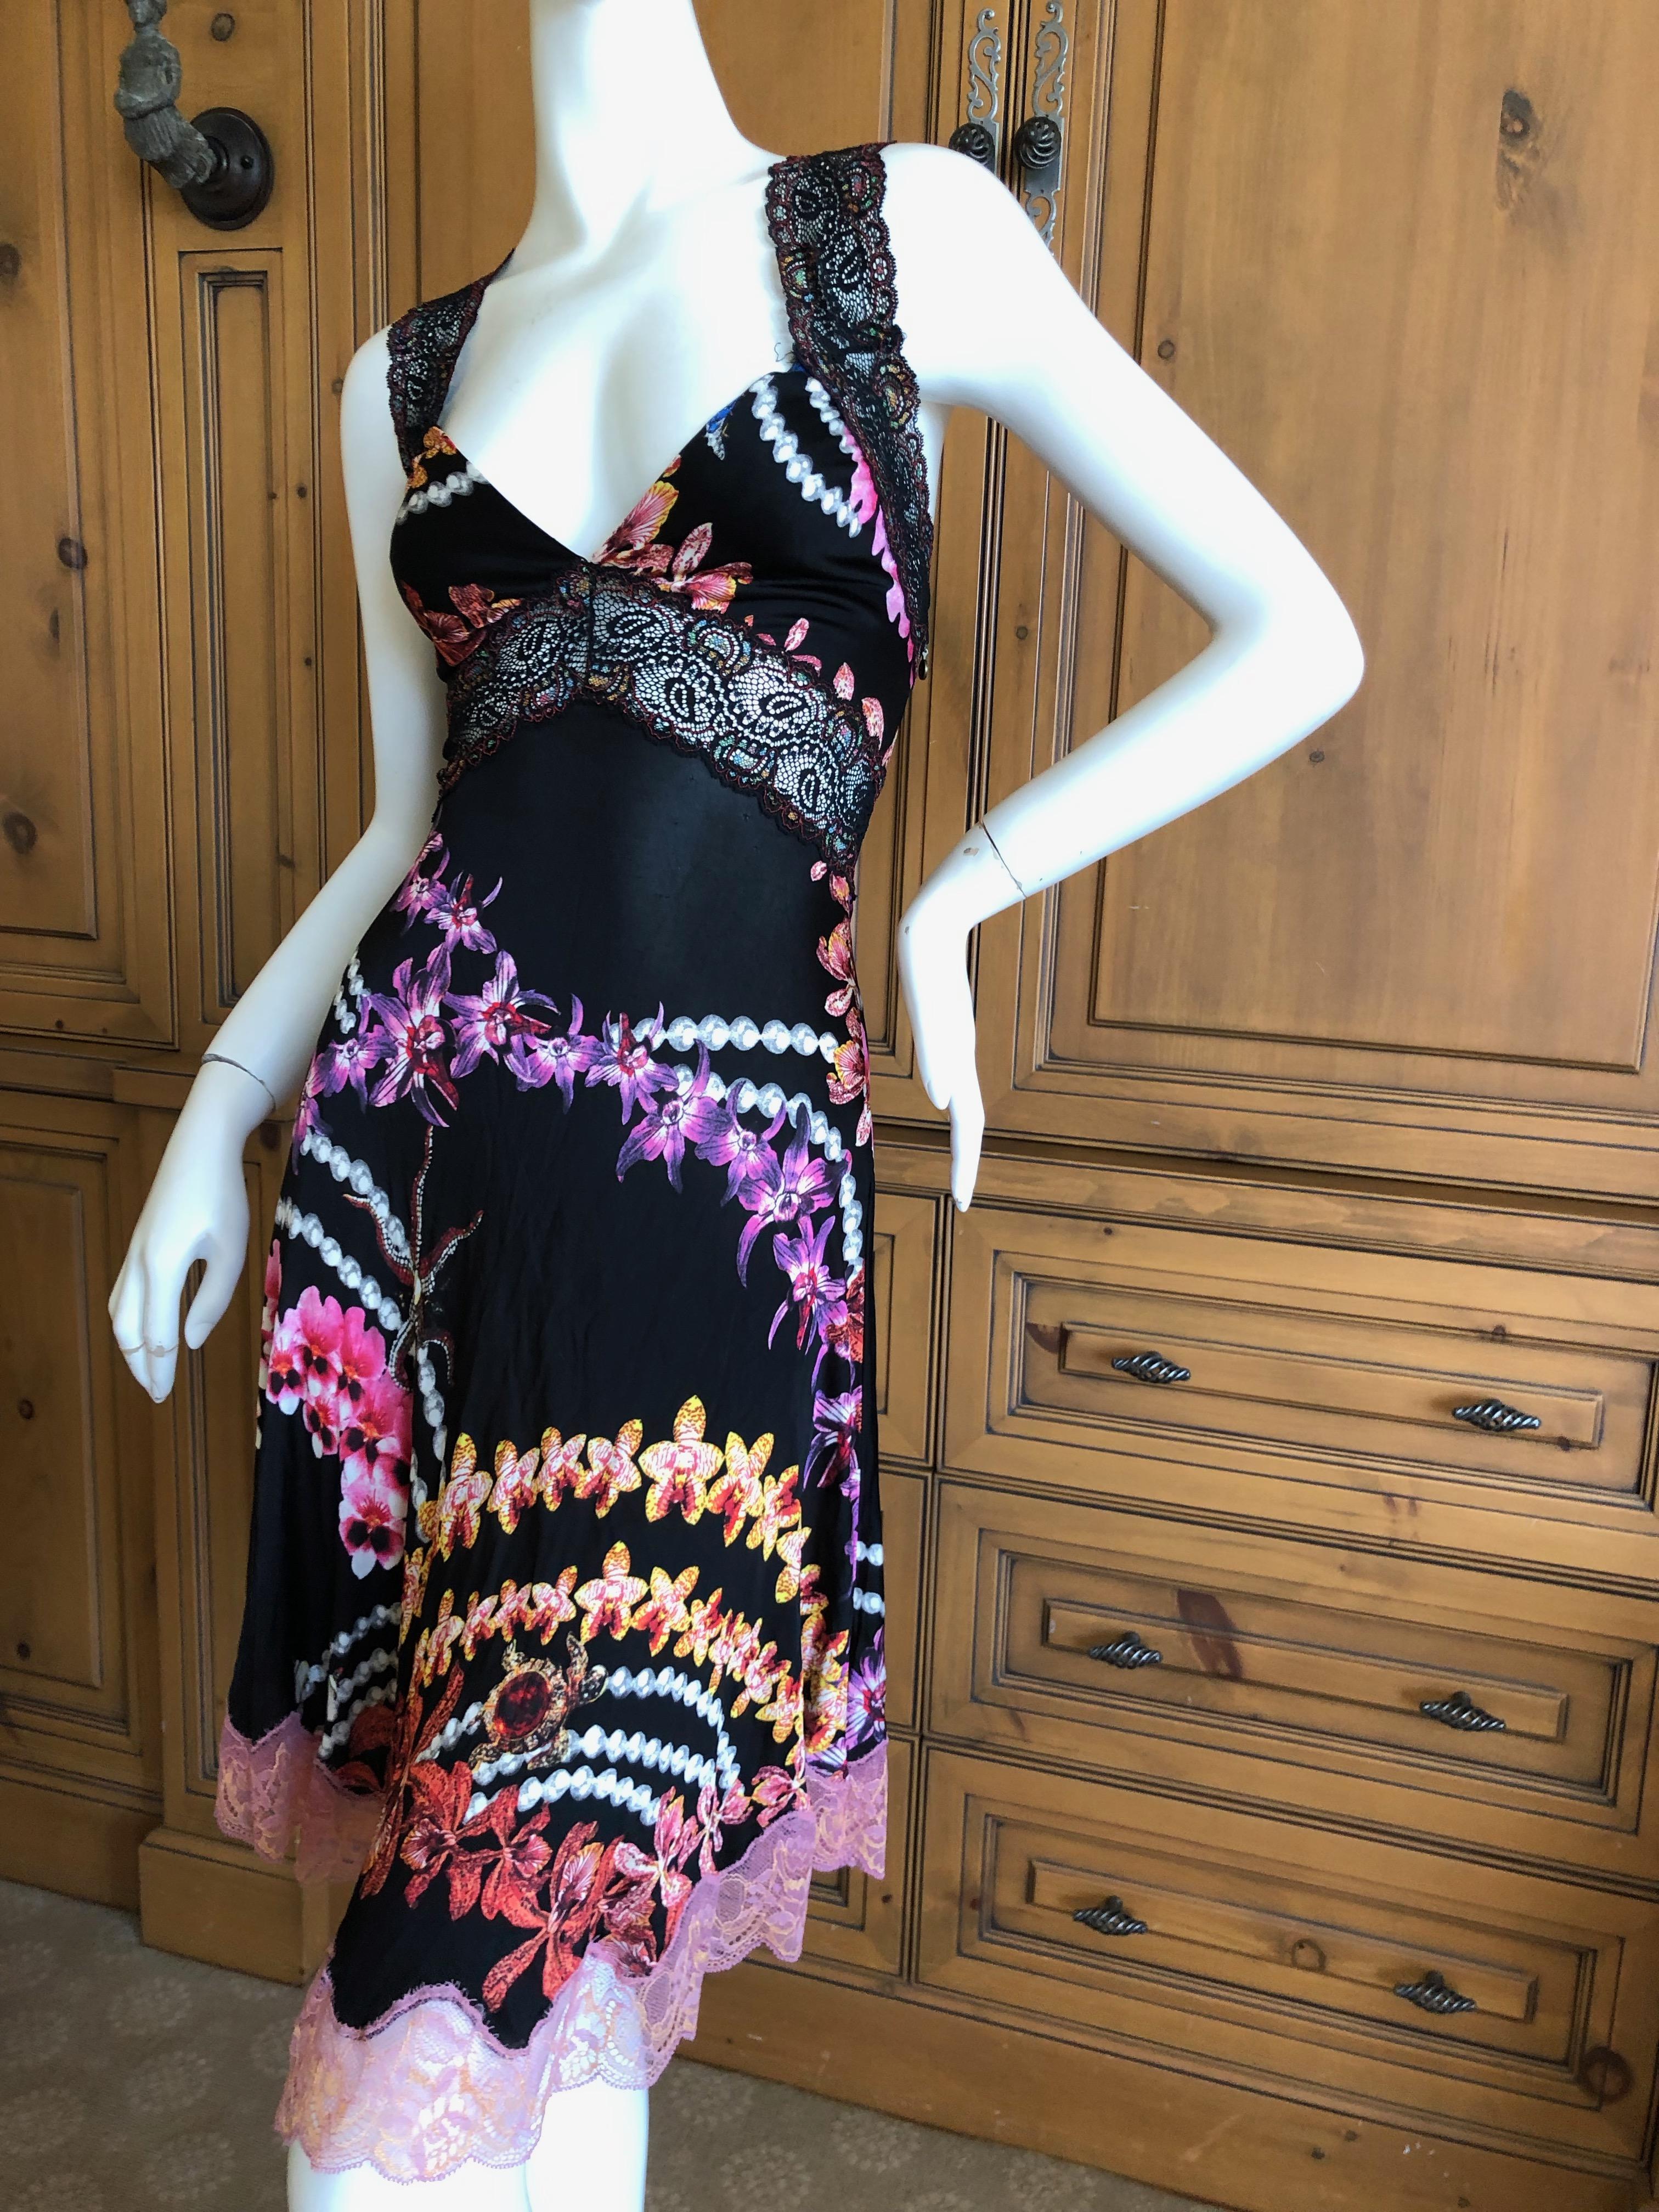 Roberto Cavalli Just Cavalli Orchid Print Lace Trim Racer Back Cocktail Dress In Excellent Condition For Sale In Cloverdale, CA